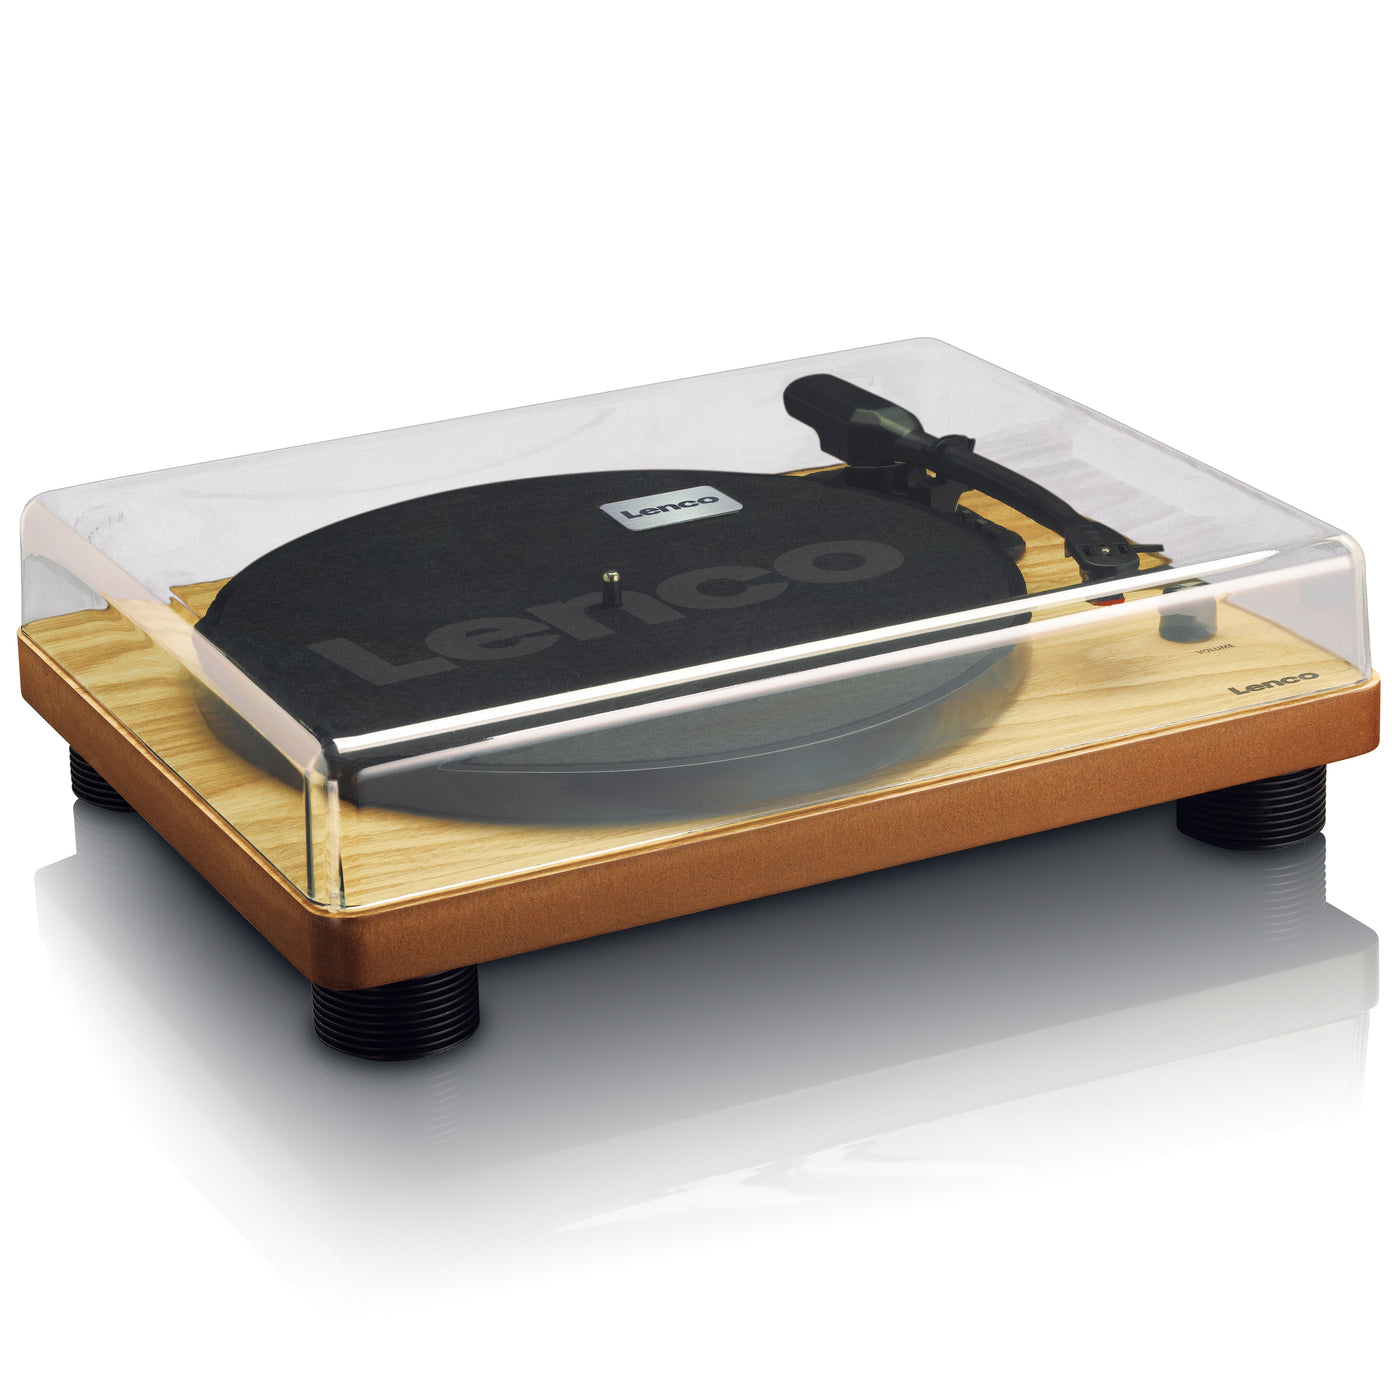 LENCO LS-50WD - Record Player with built-in speakers USB Encoding - Wood